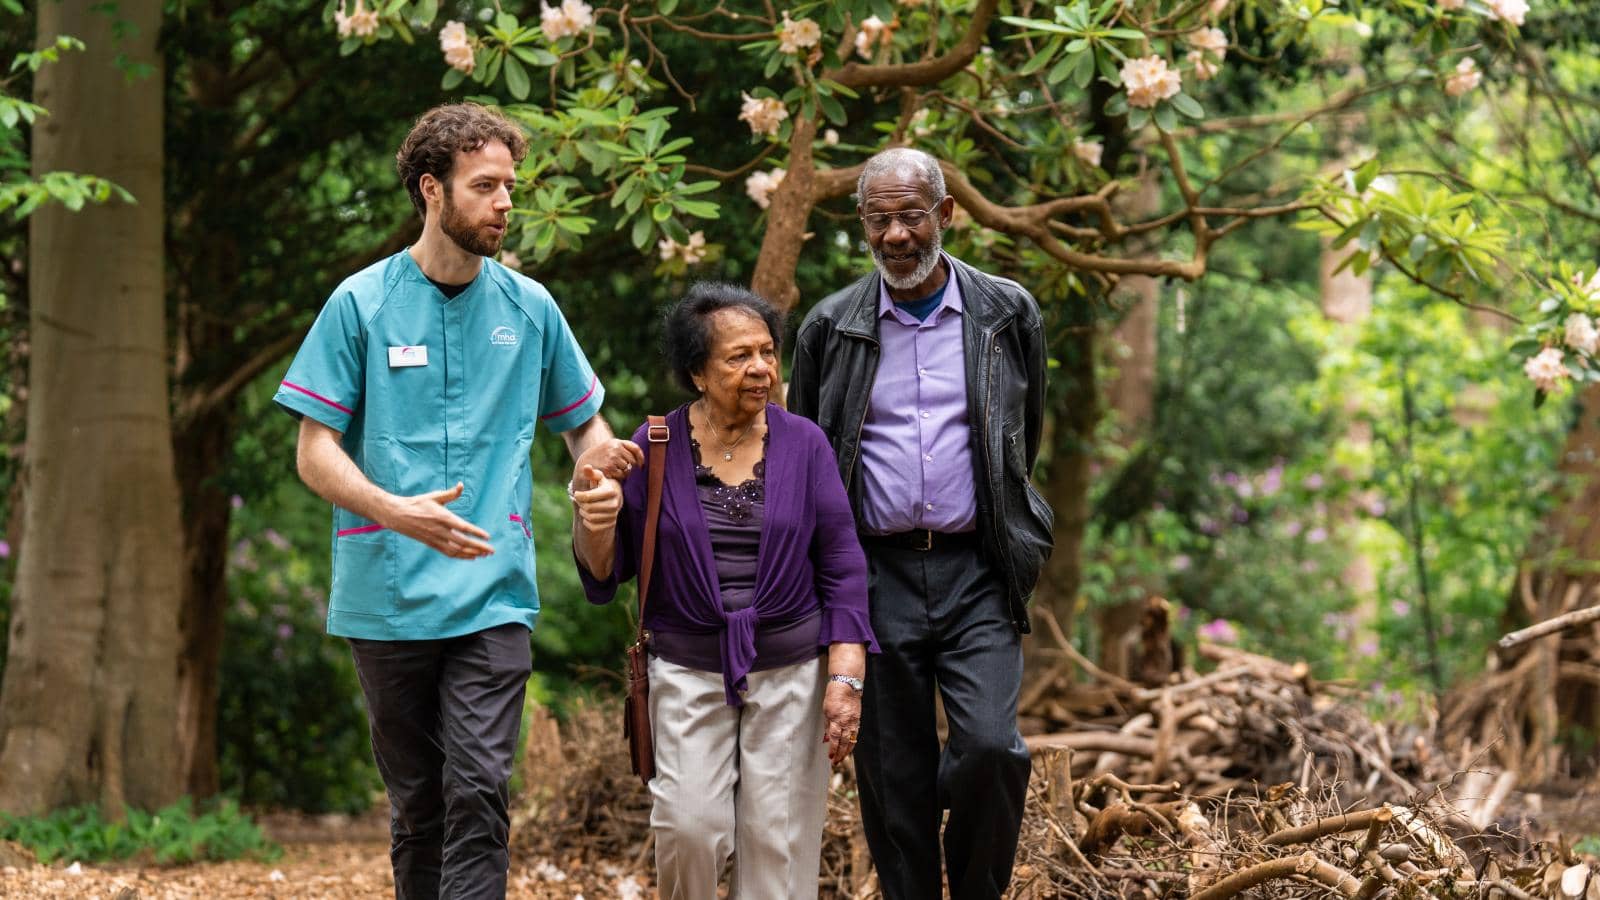 Male care assistant walking with an elderly couple outside